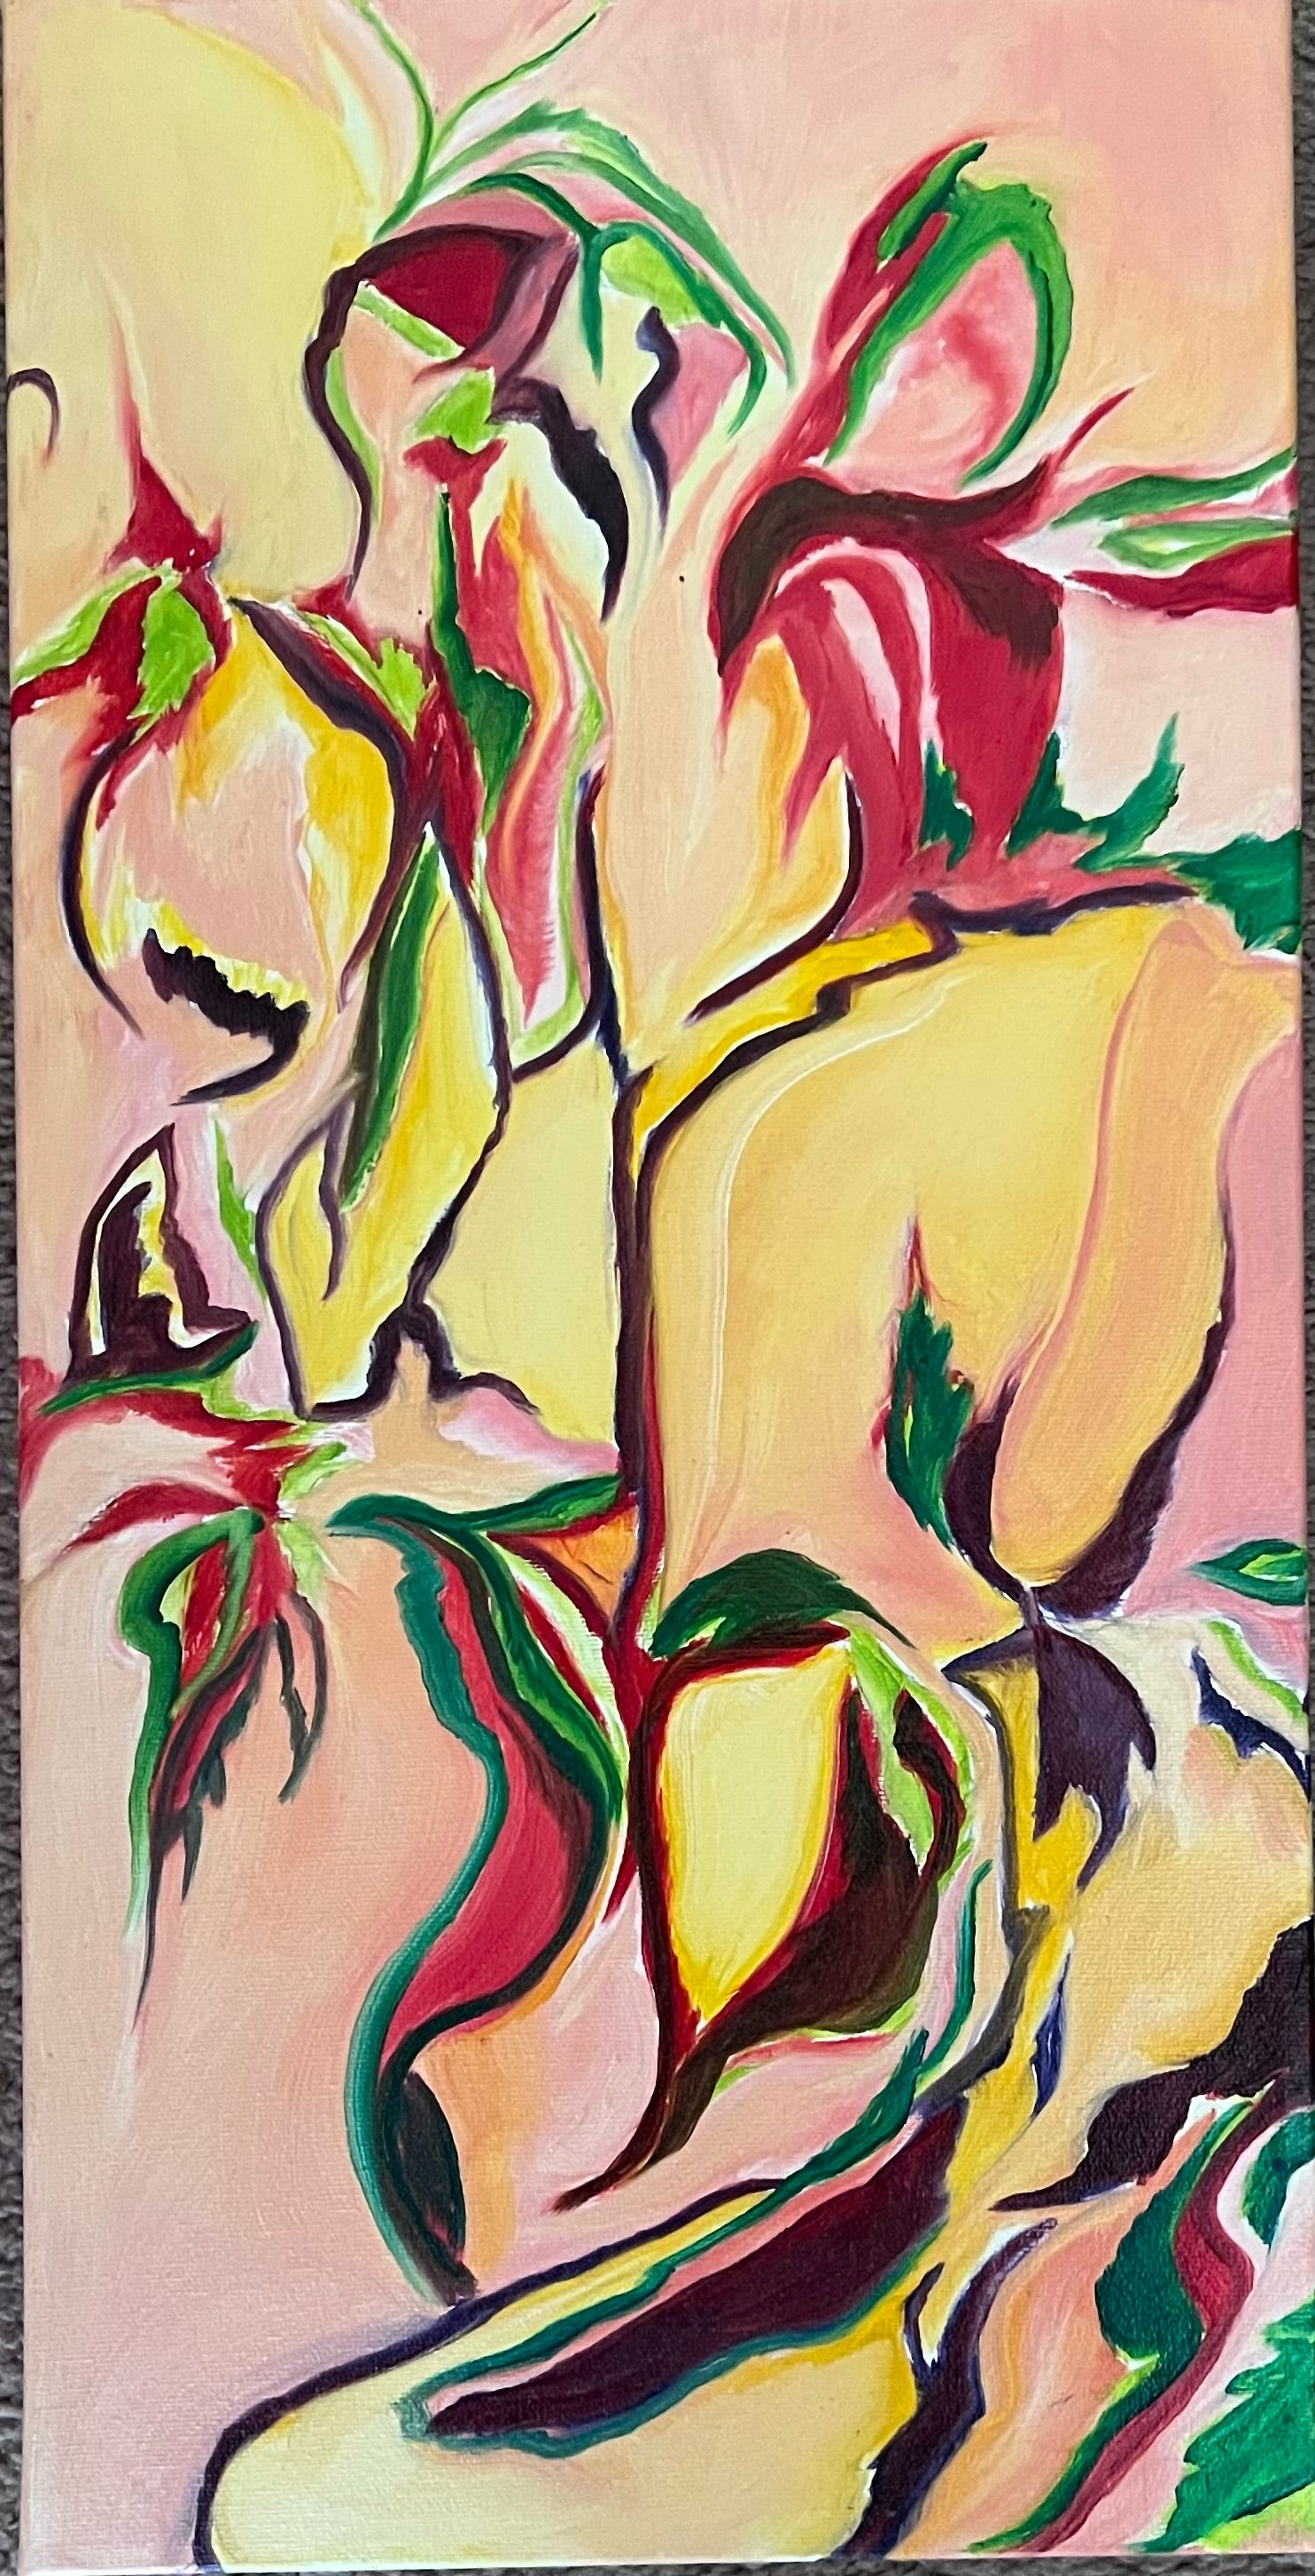 abstract, oil on canvas